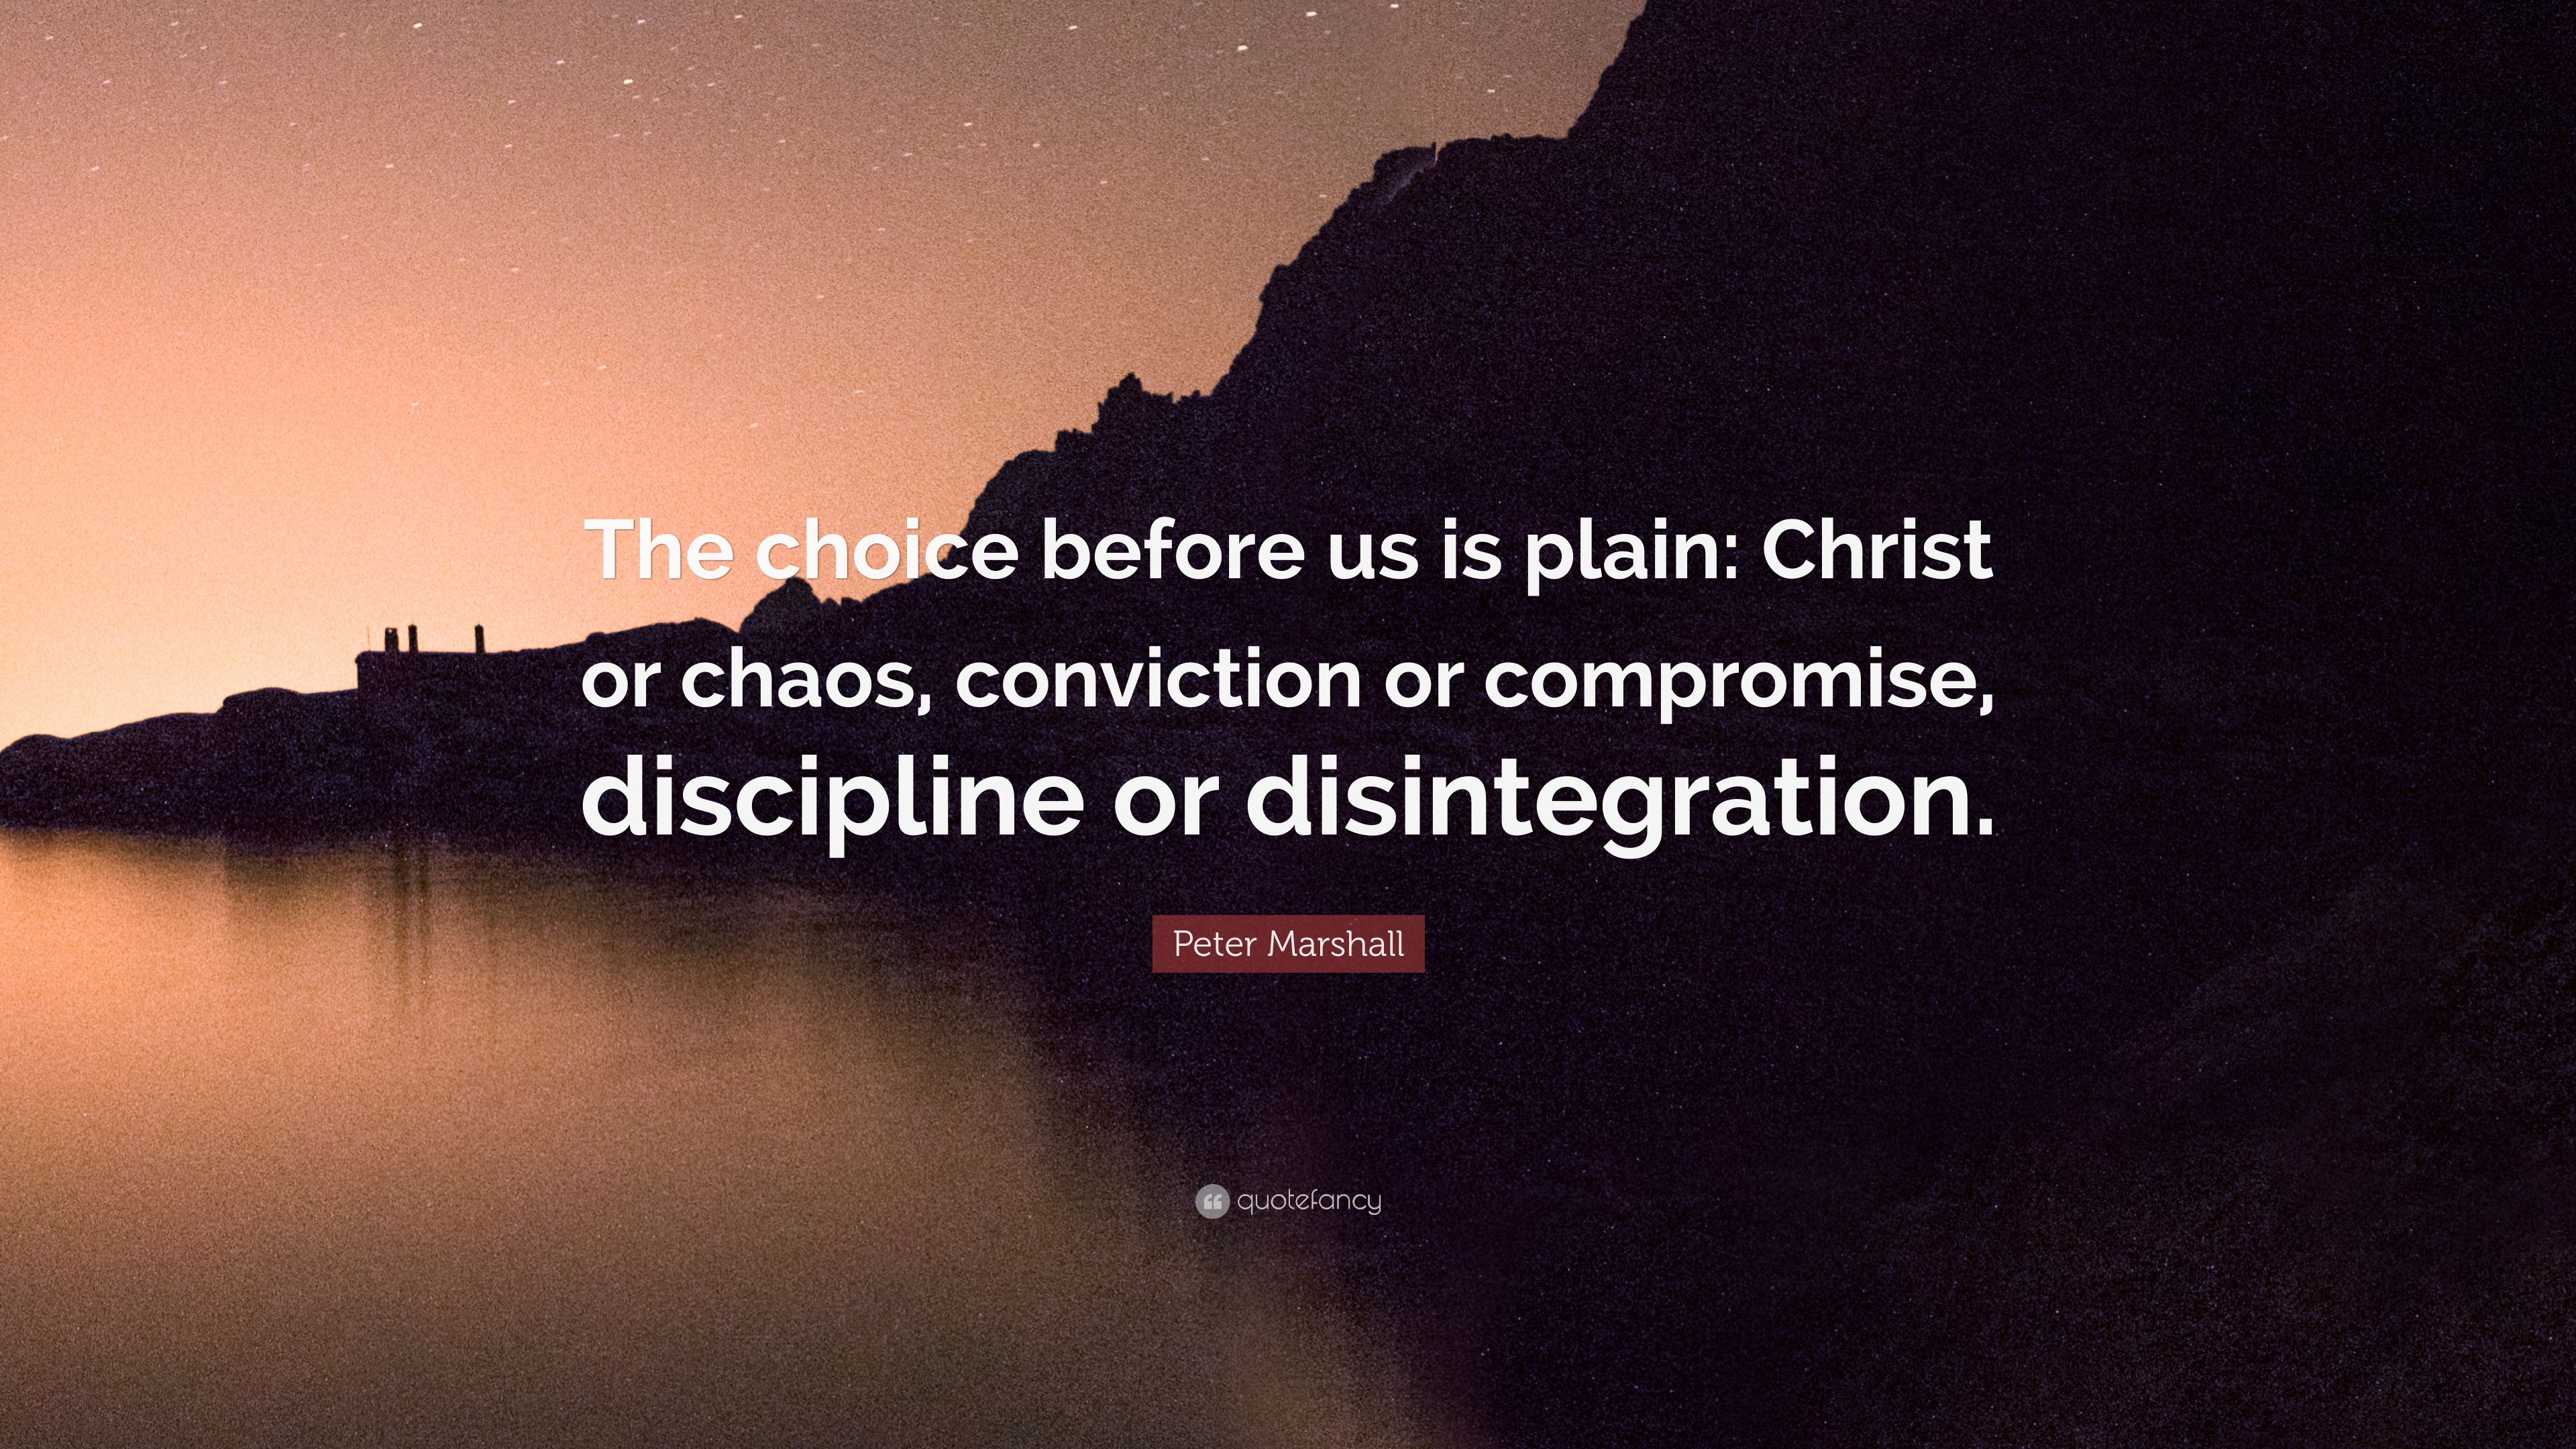 Peter Marshall Quote: “The choice before us is plain: Christ or